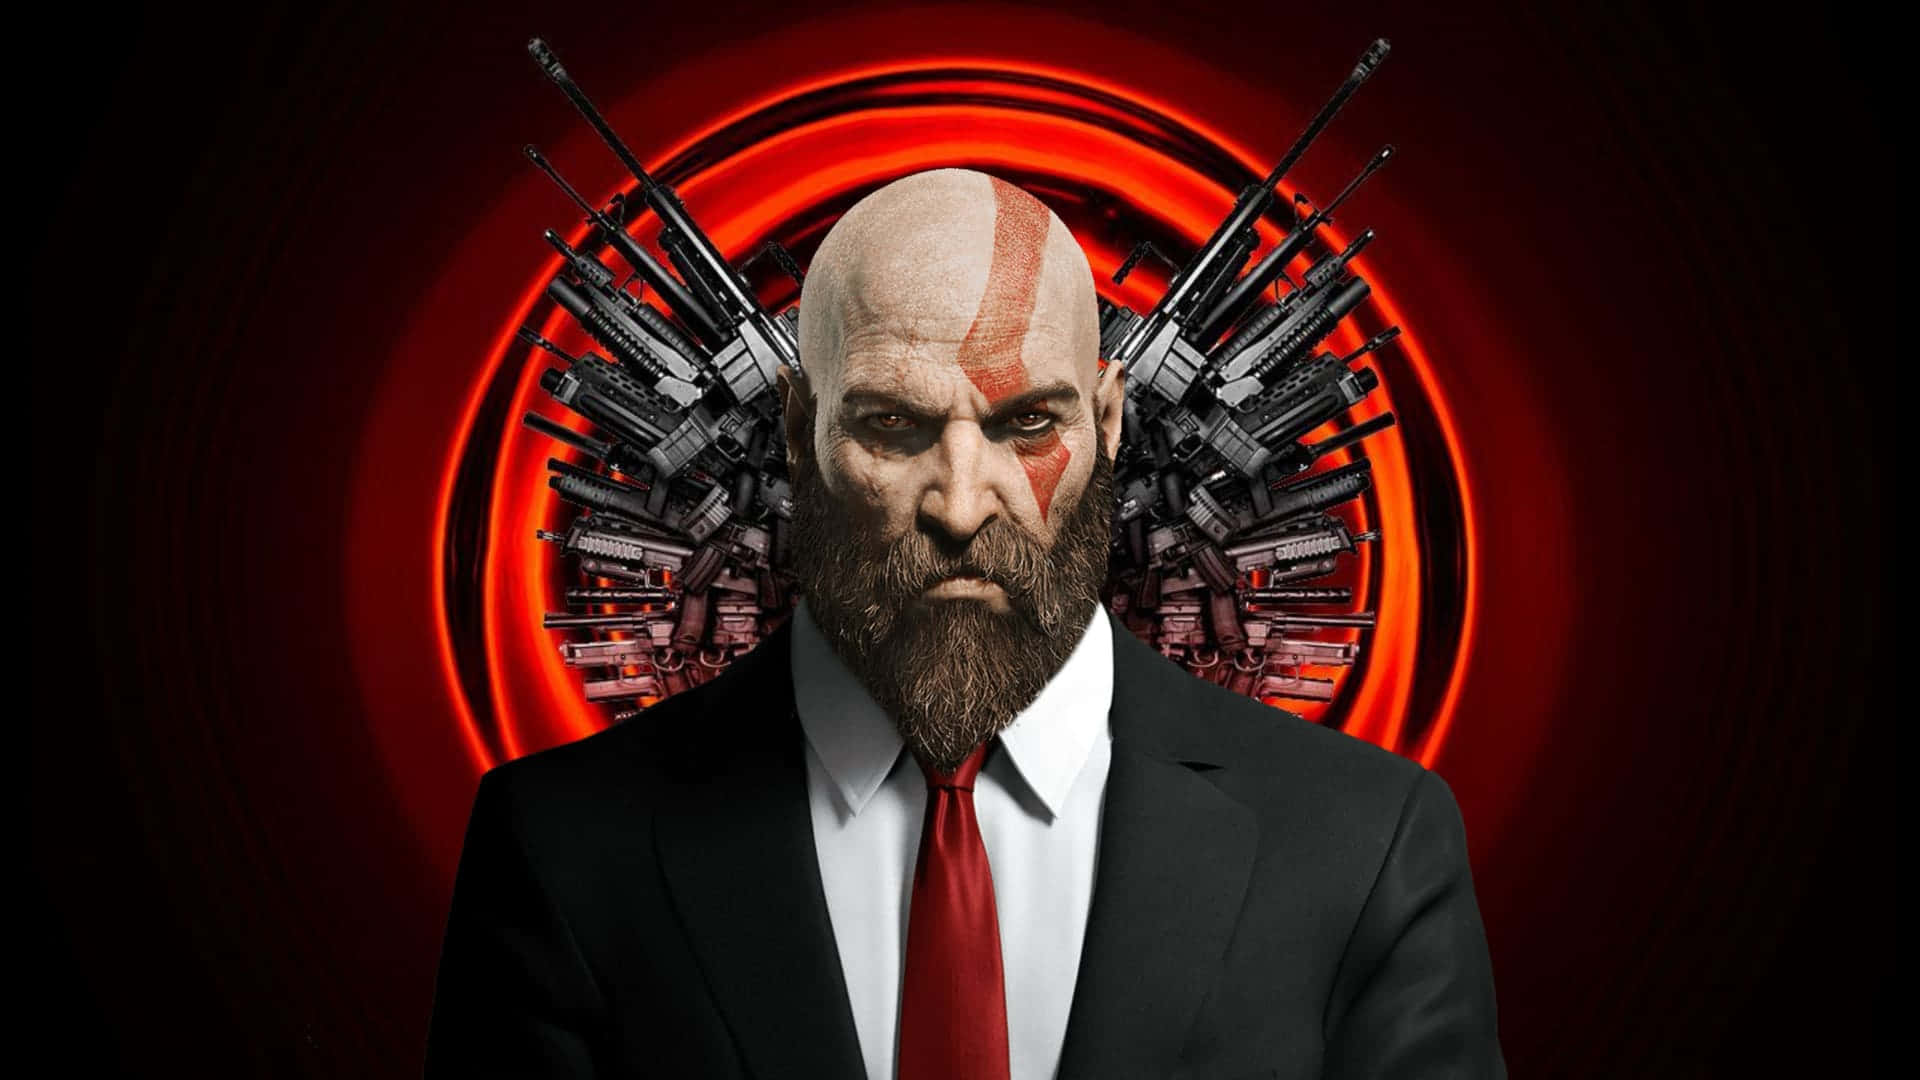 A Man In A Suit With Guns In Front Of Him Wallpaper